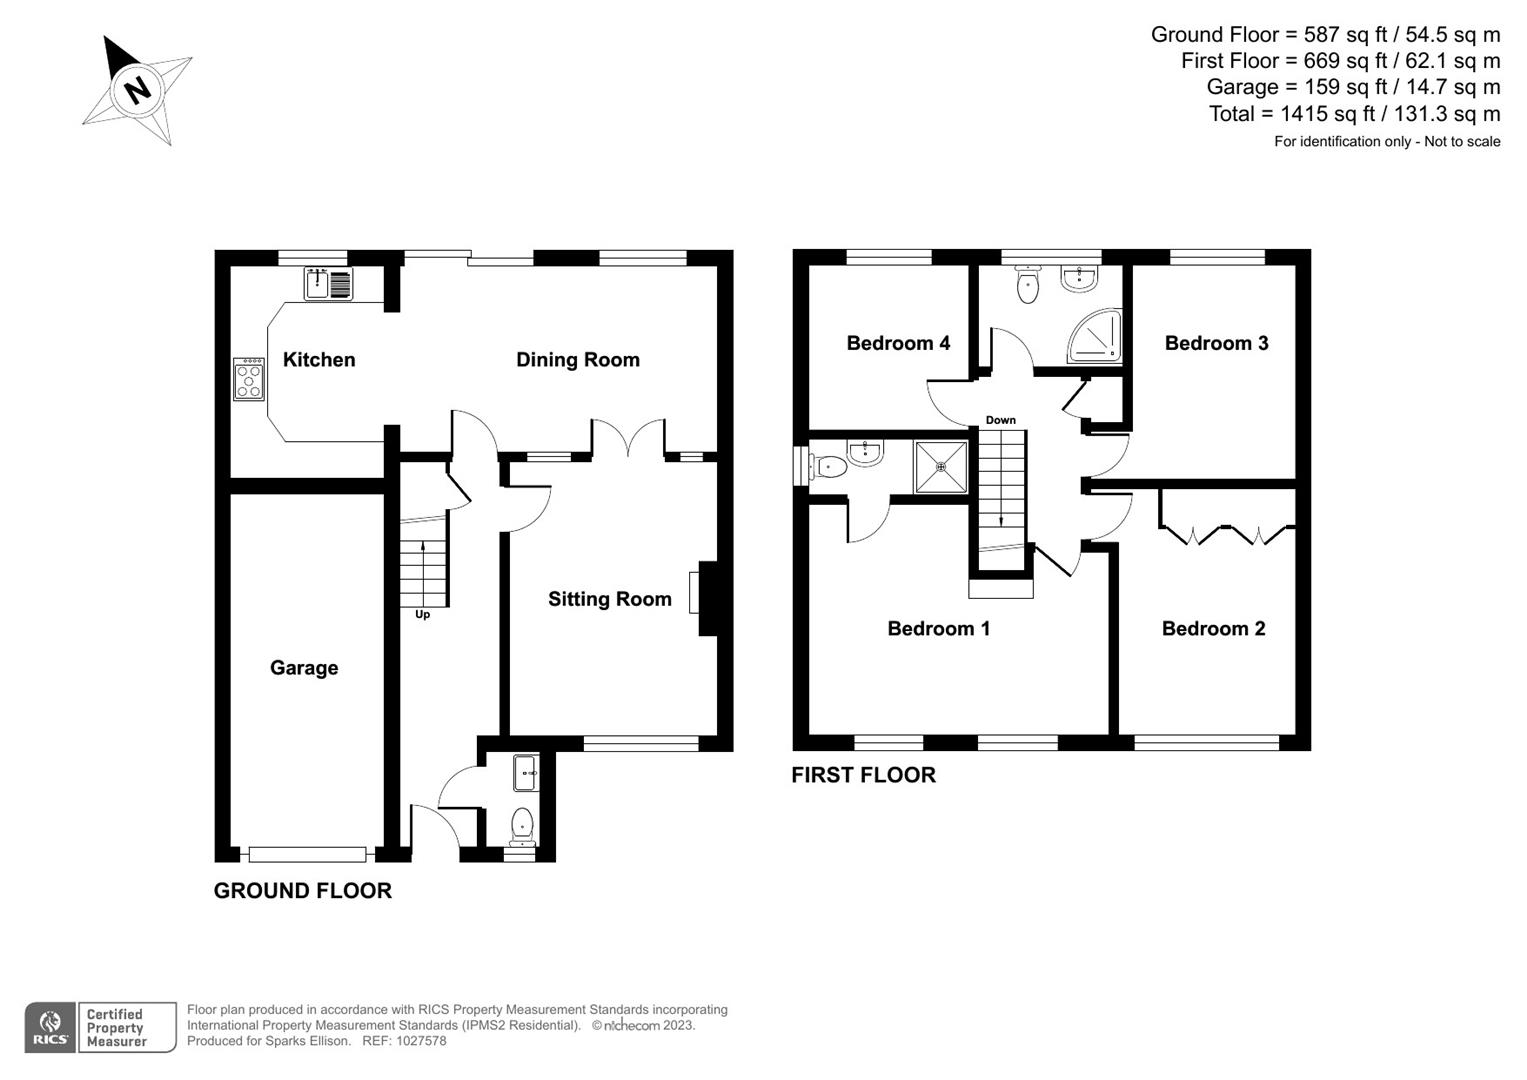 Bodycoats Road, Chandler’s Ford, Eastleigh floorplan